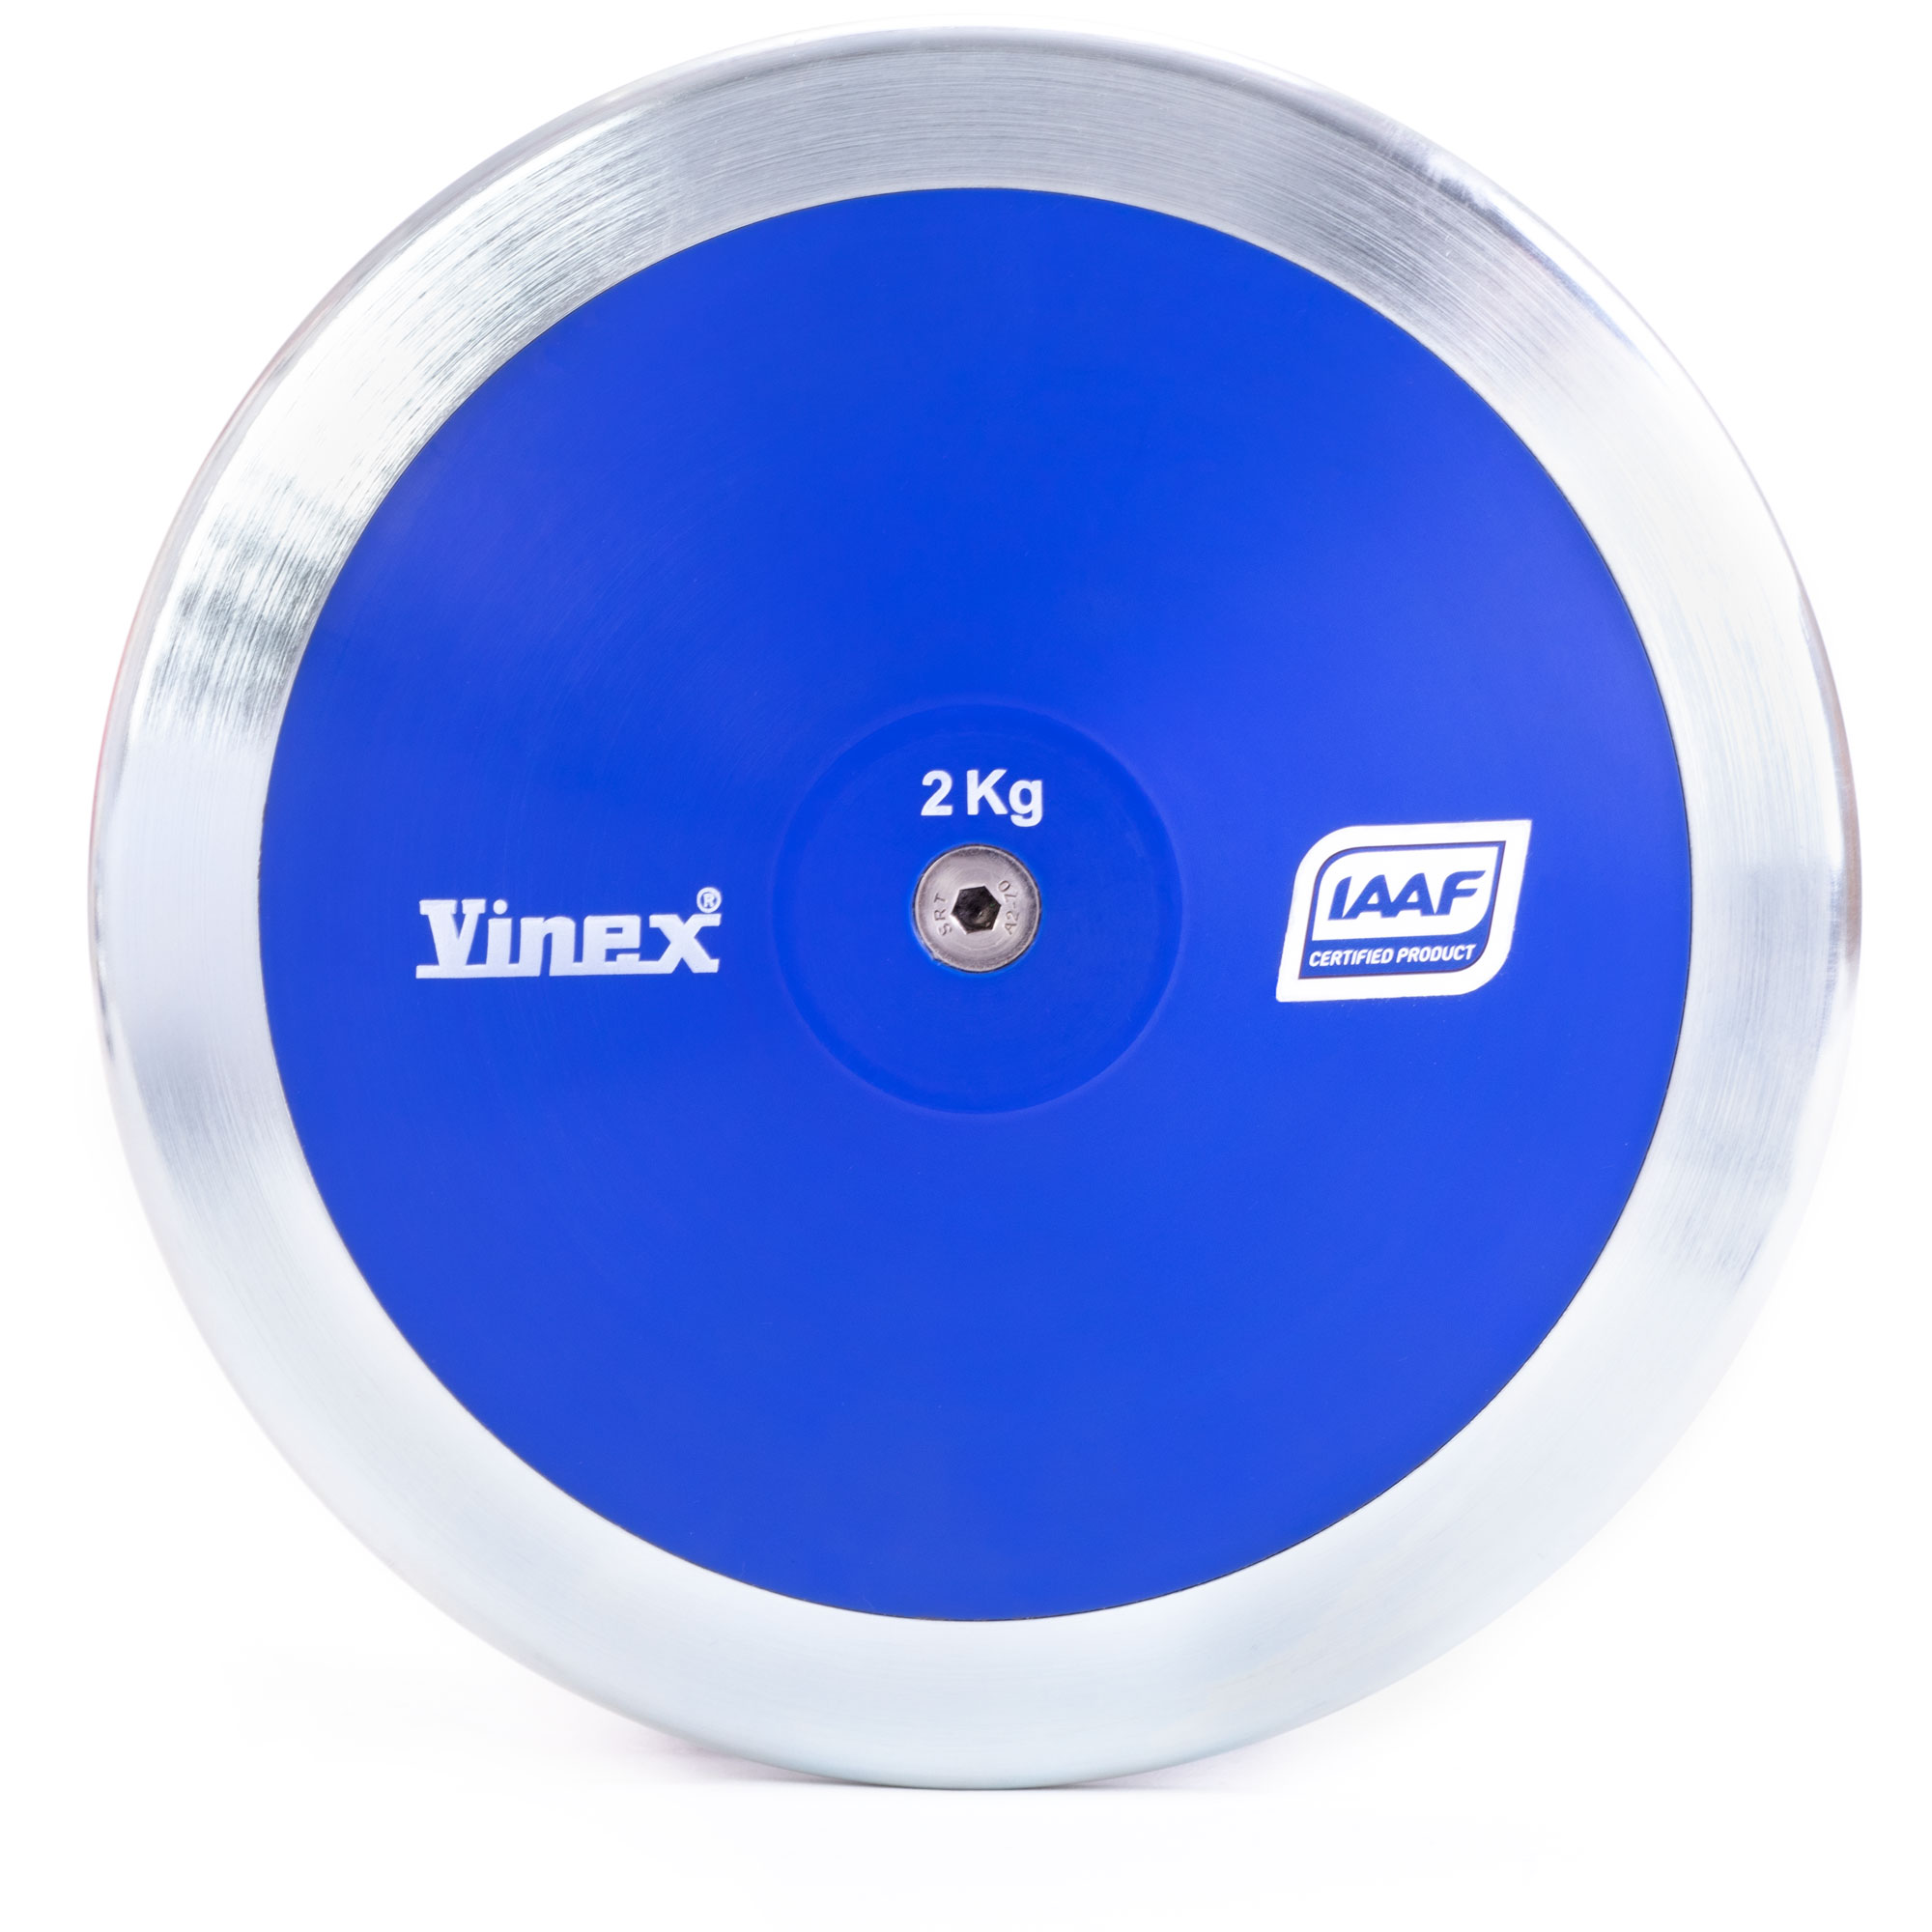 High Spin Discus, 80% Rim Weight, 2kg